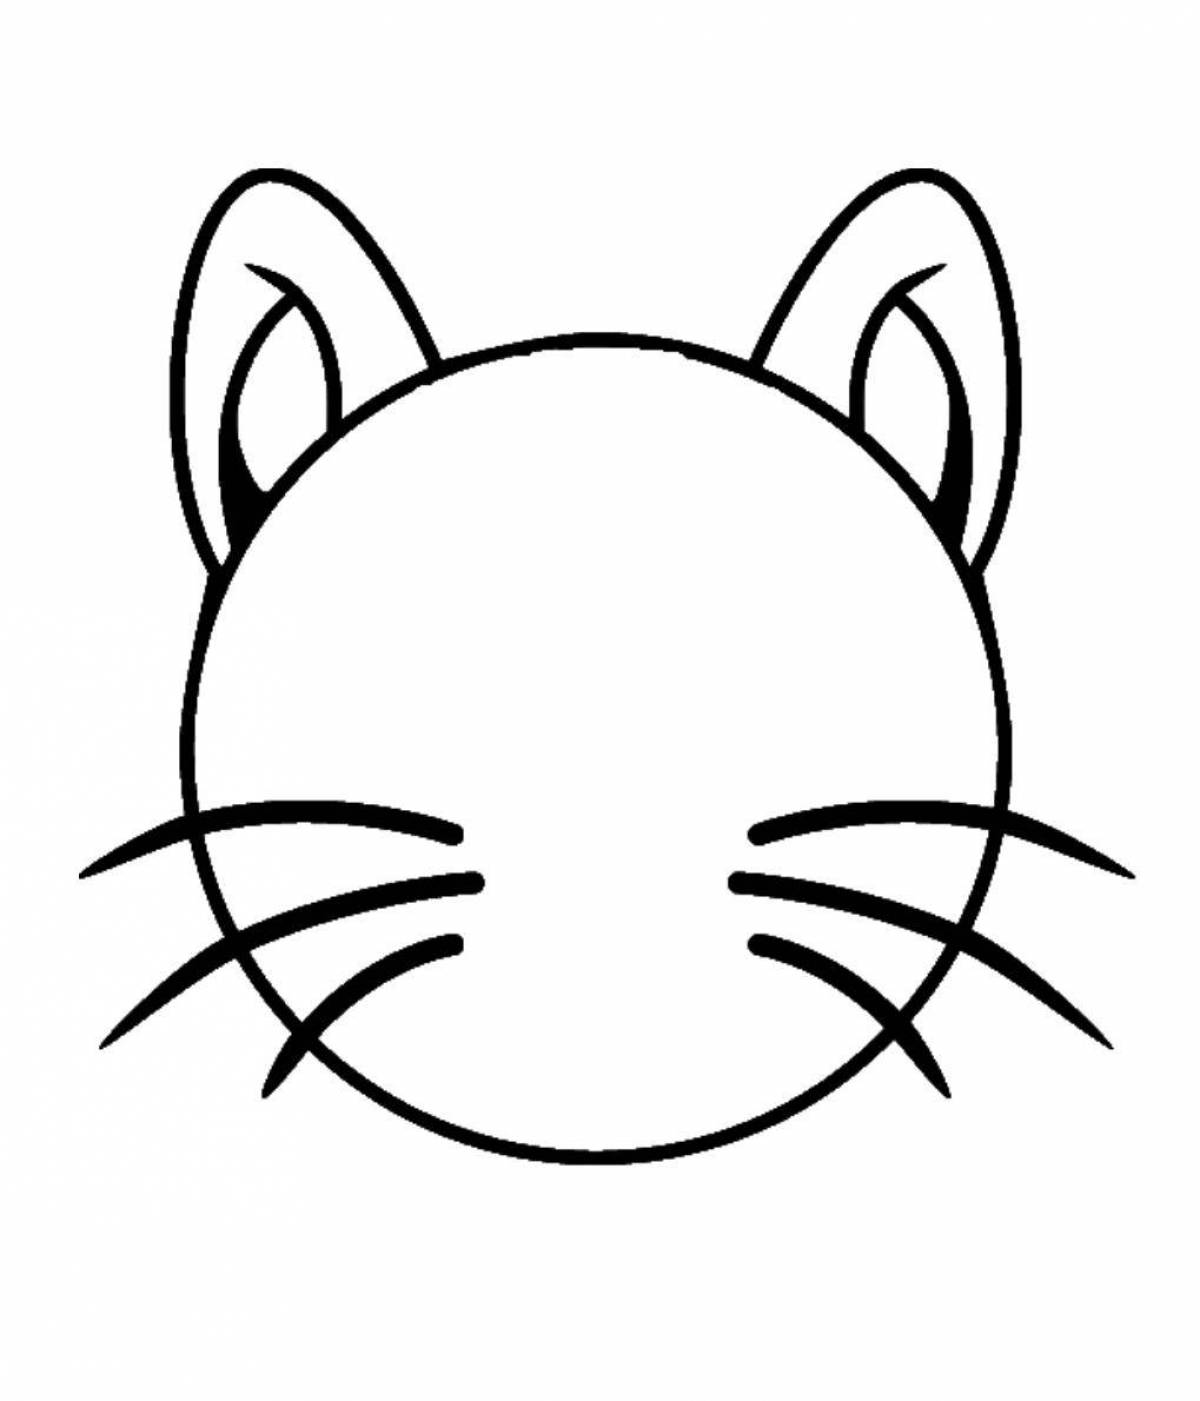 Furry cat coloring page